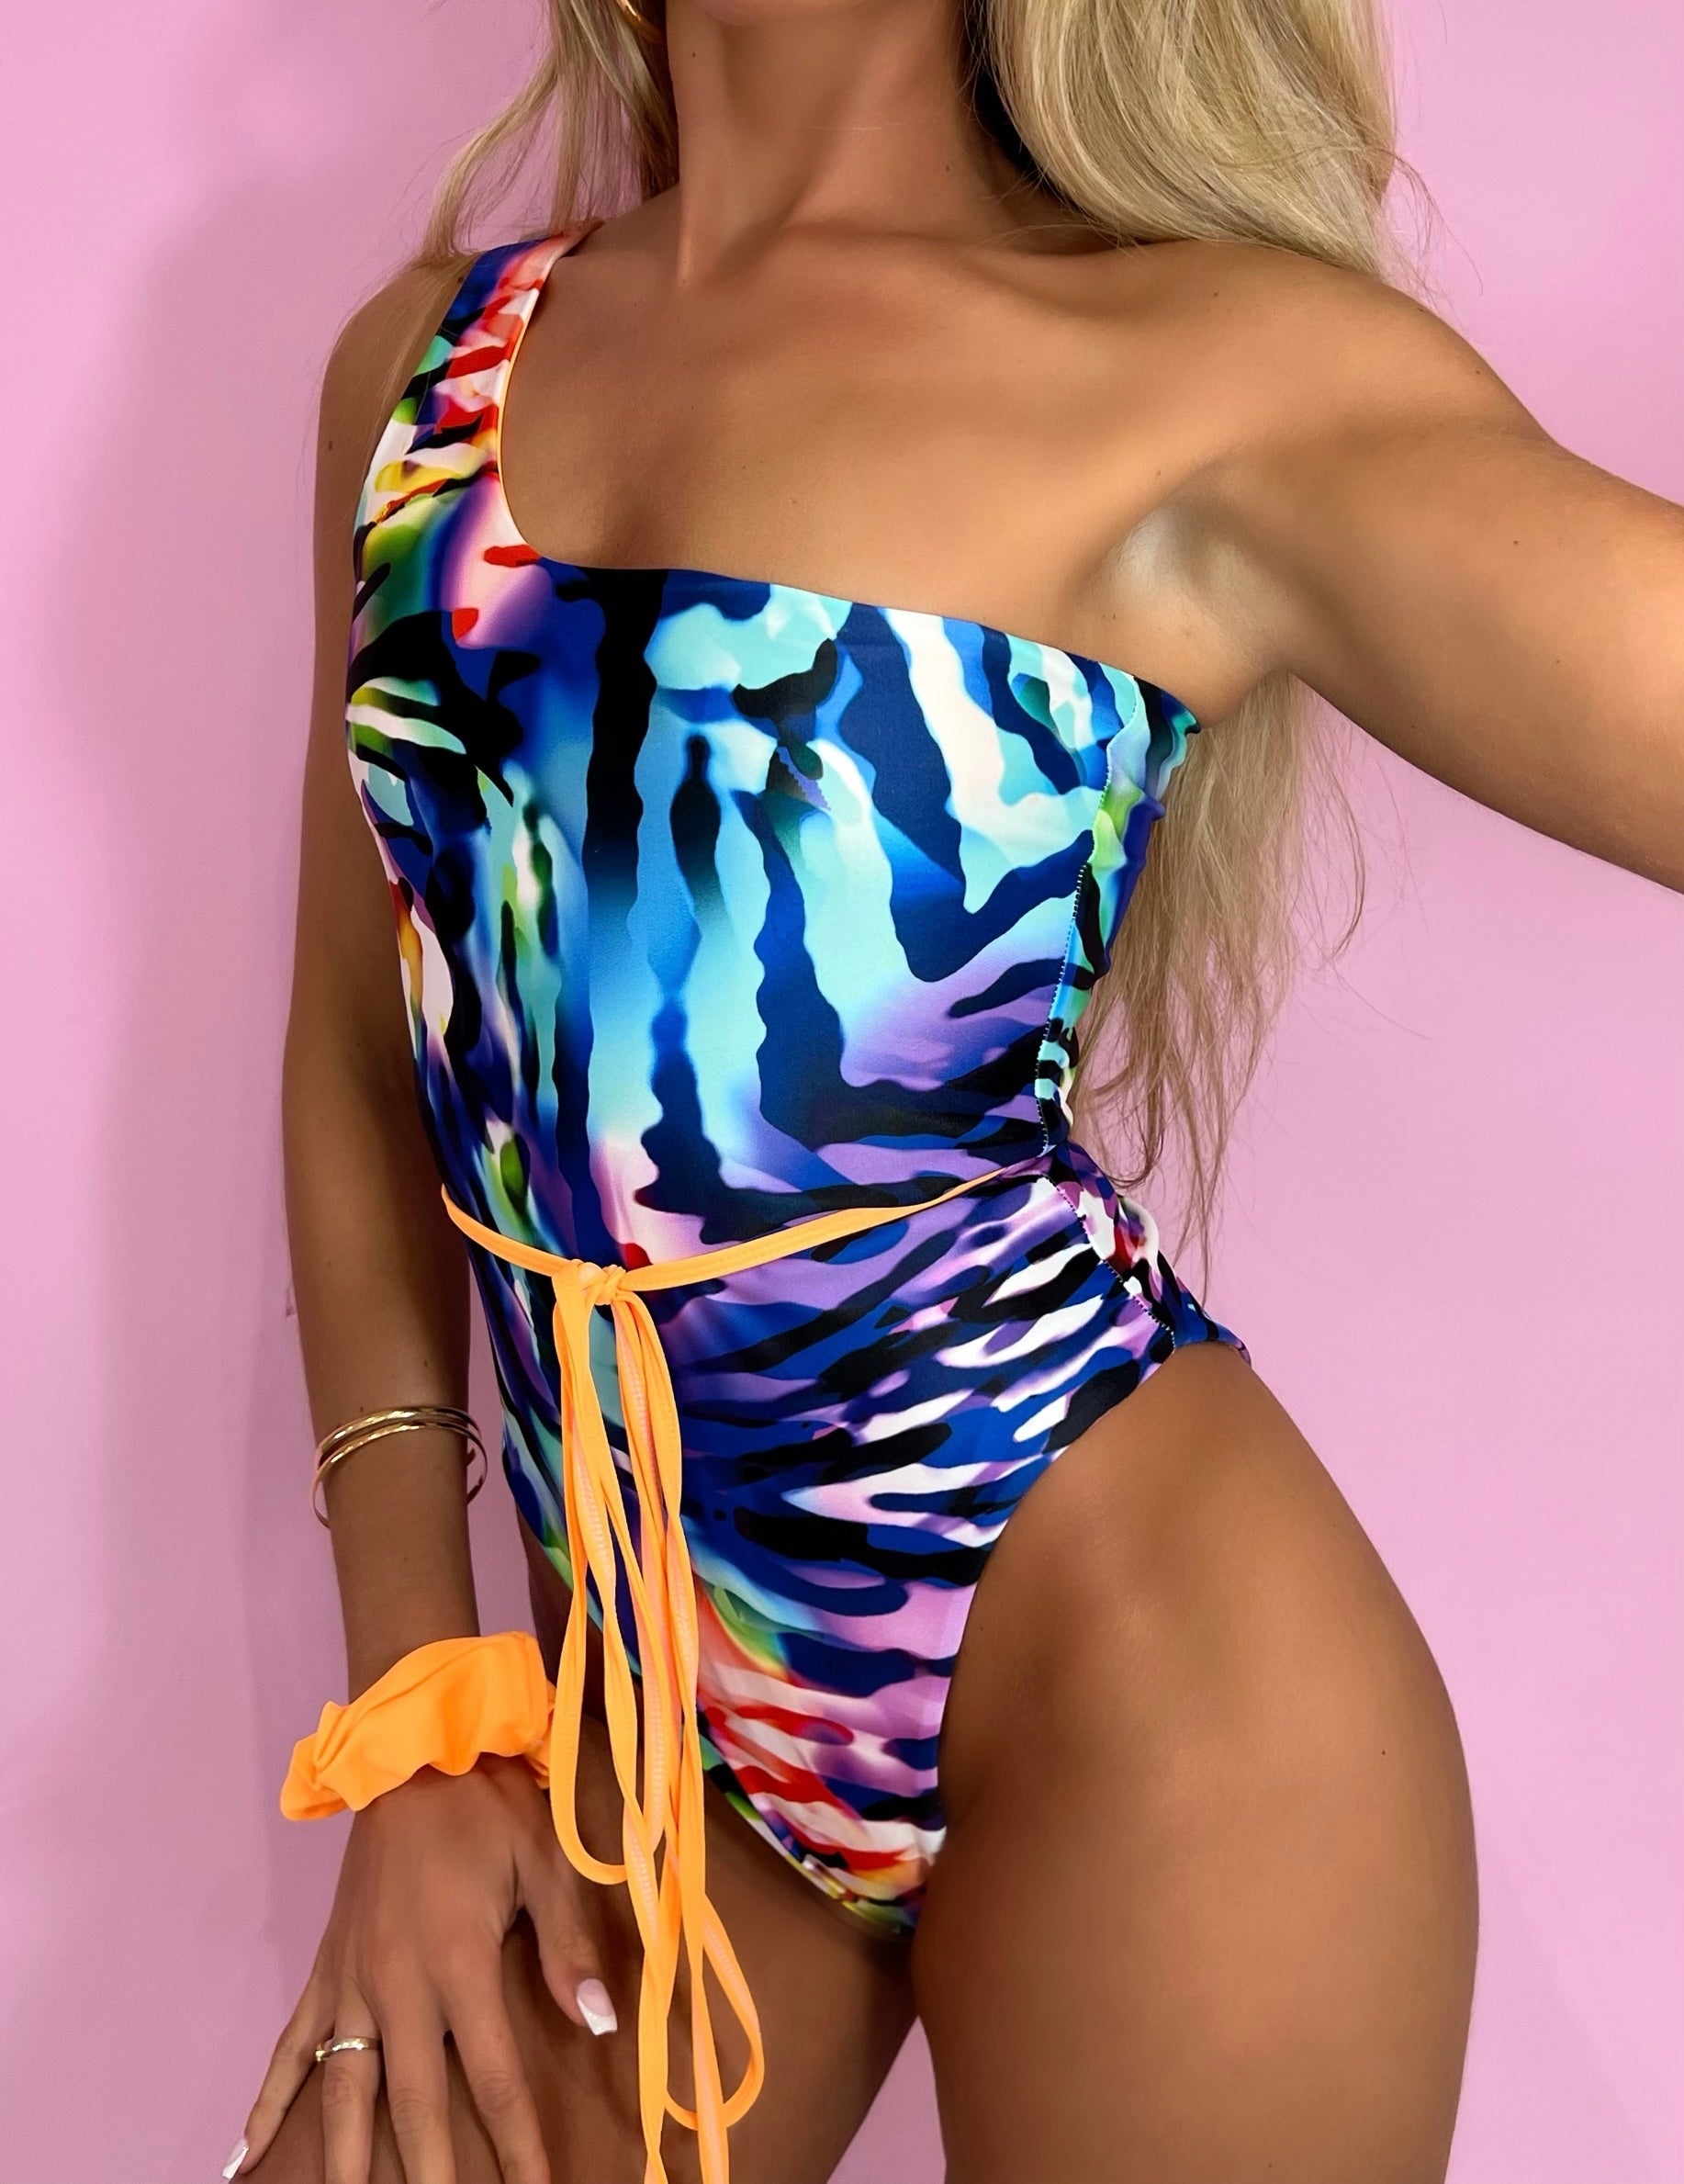 Promotion Swimsuit - selected prints